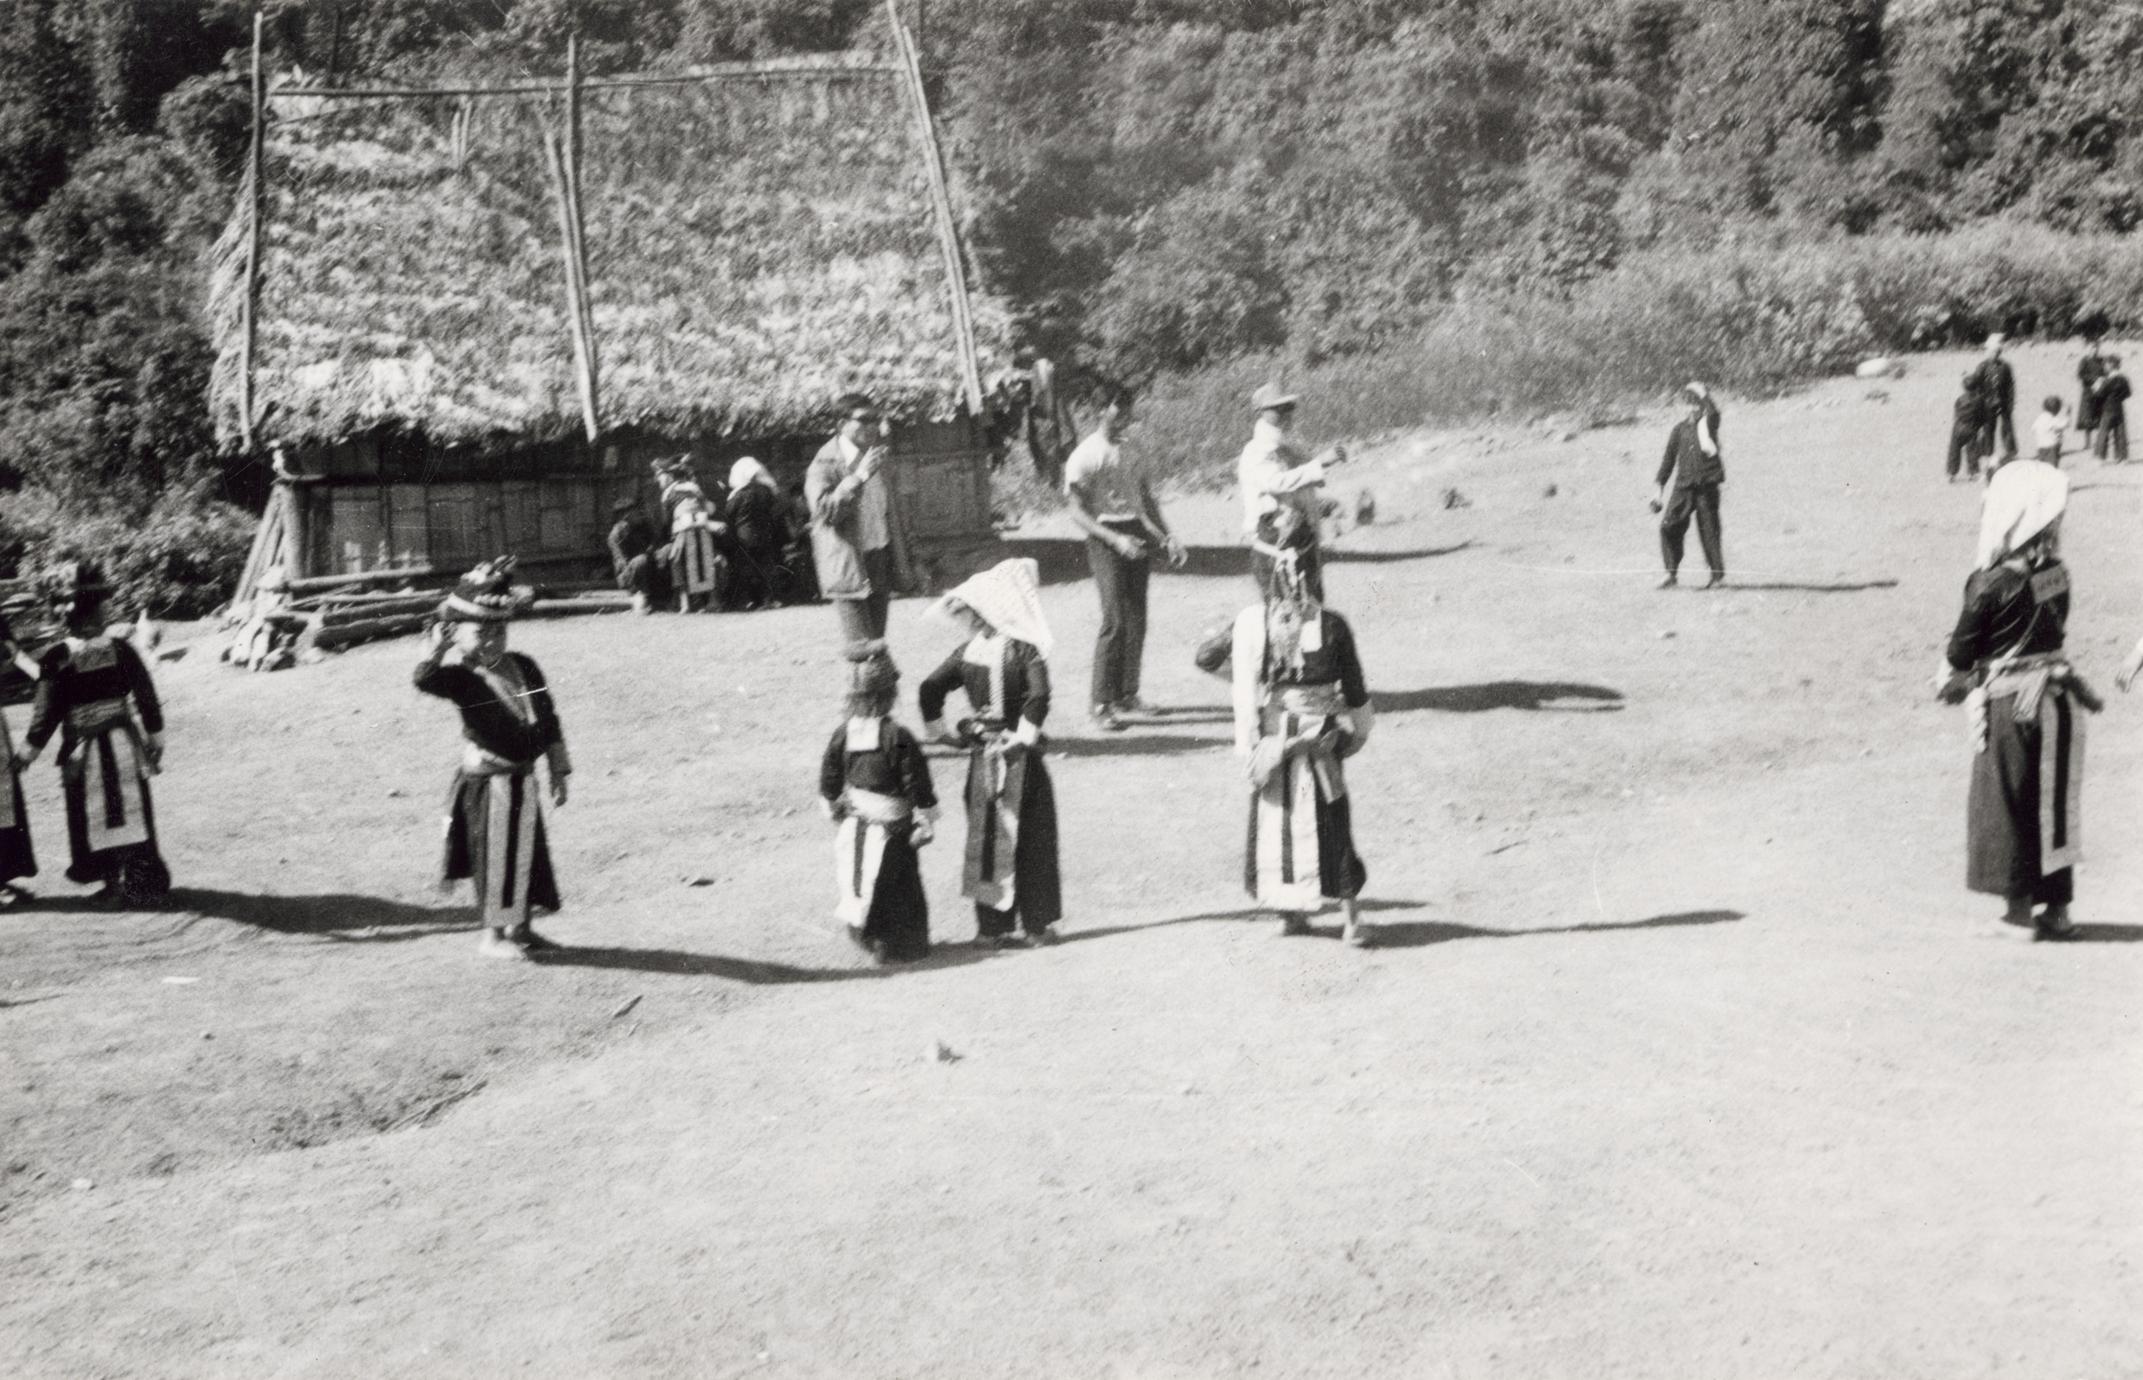 White Hmong youth playing catch ball in Houa Khong Province